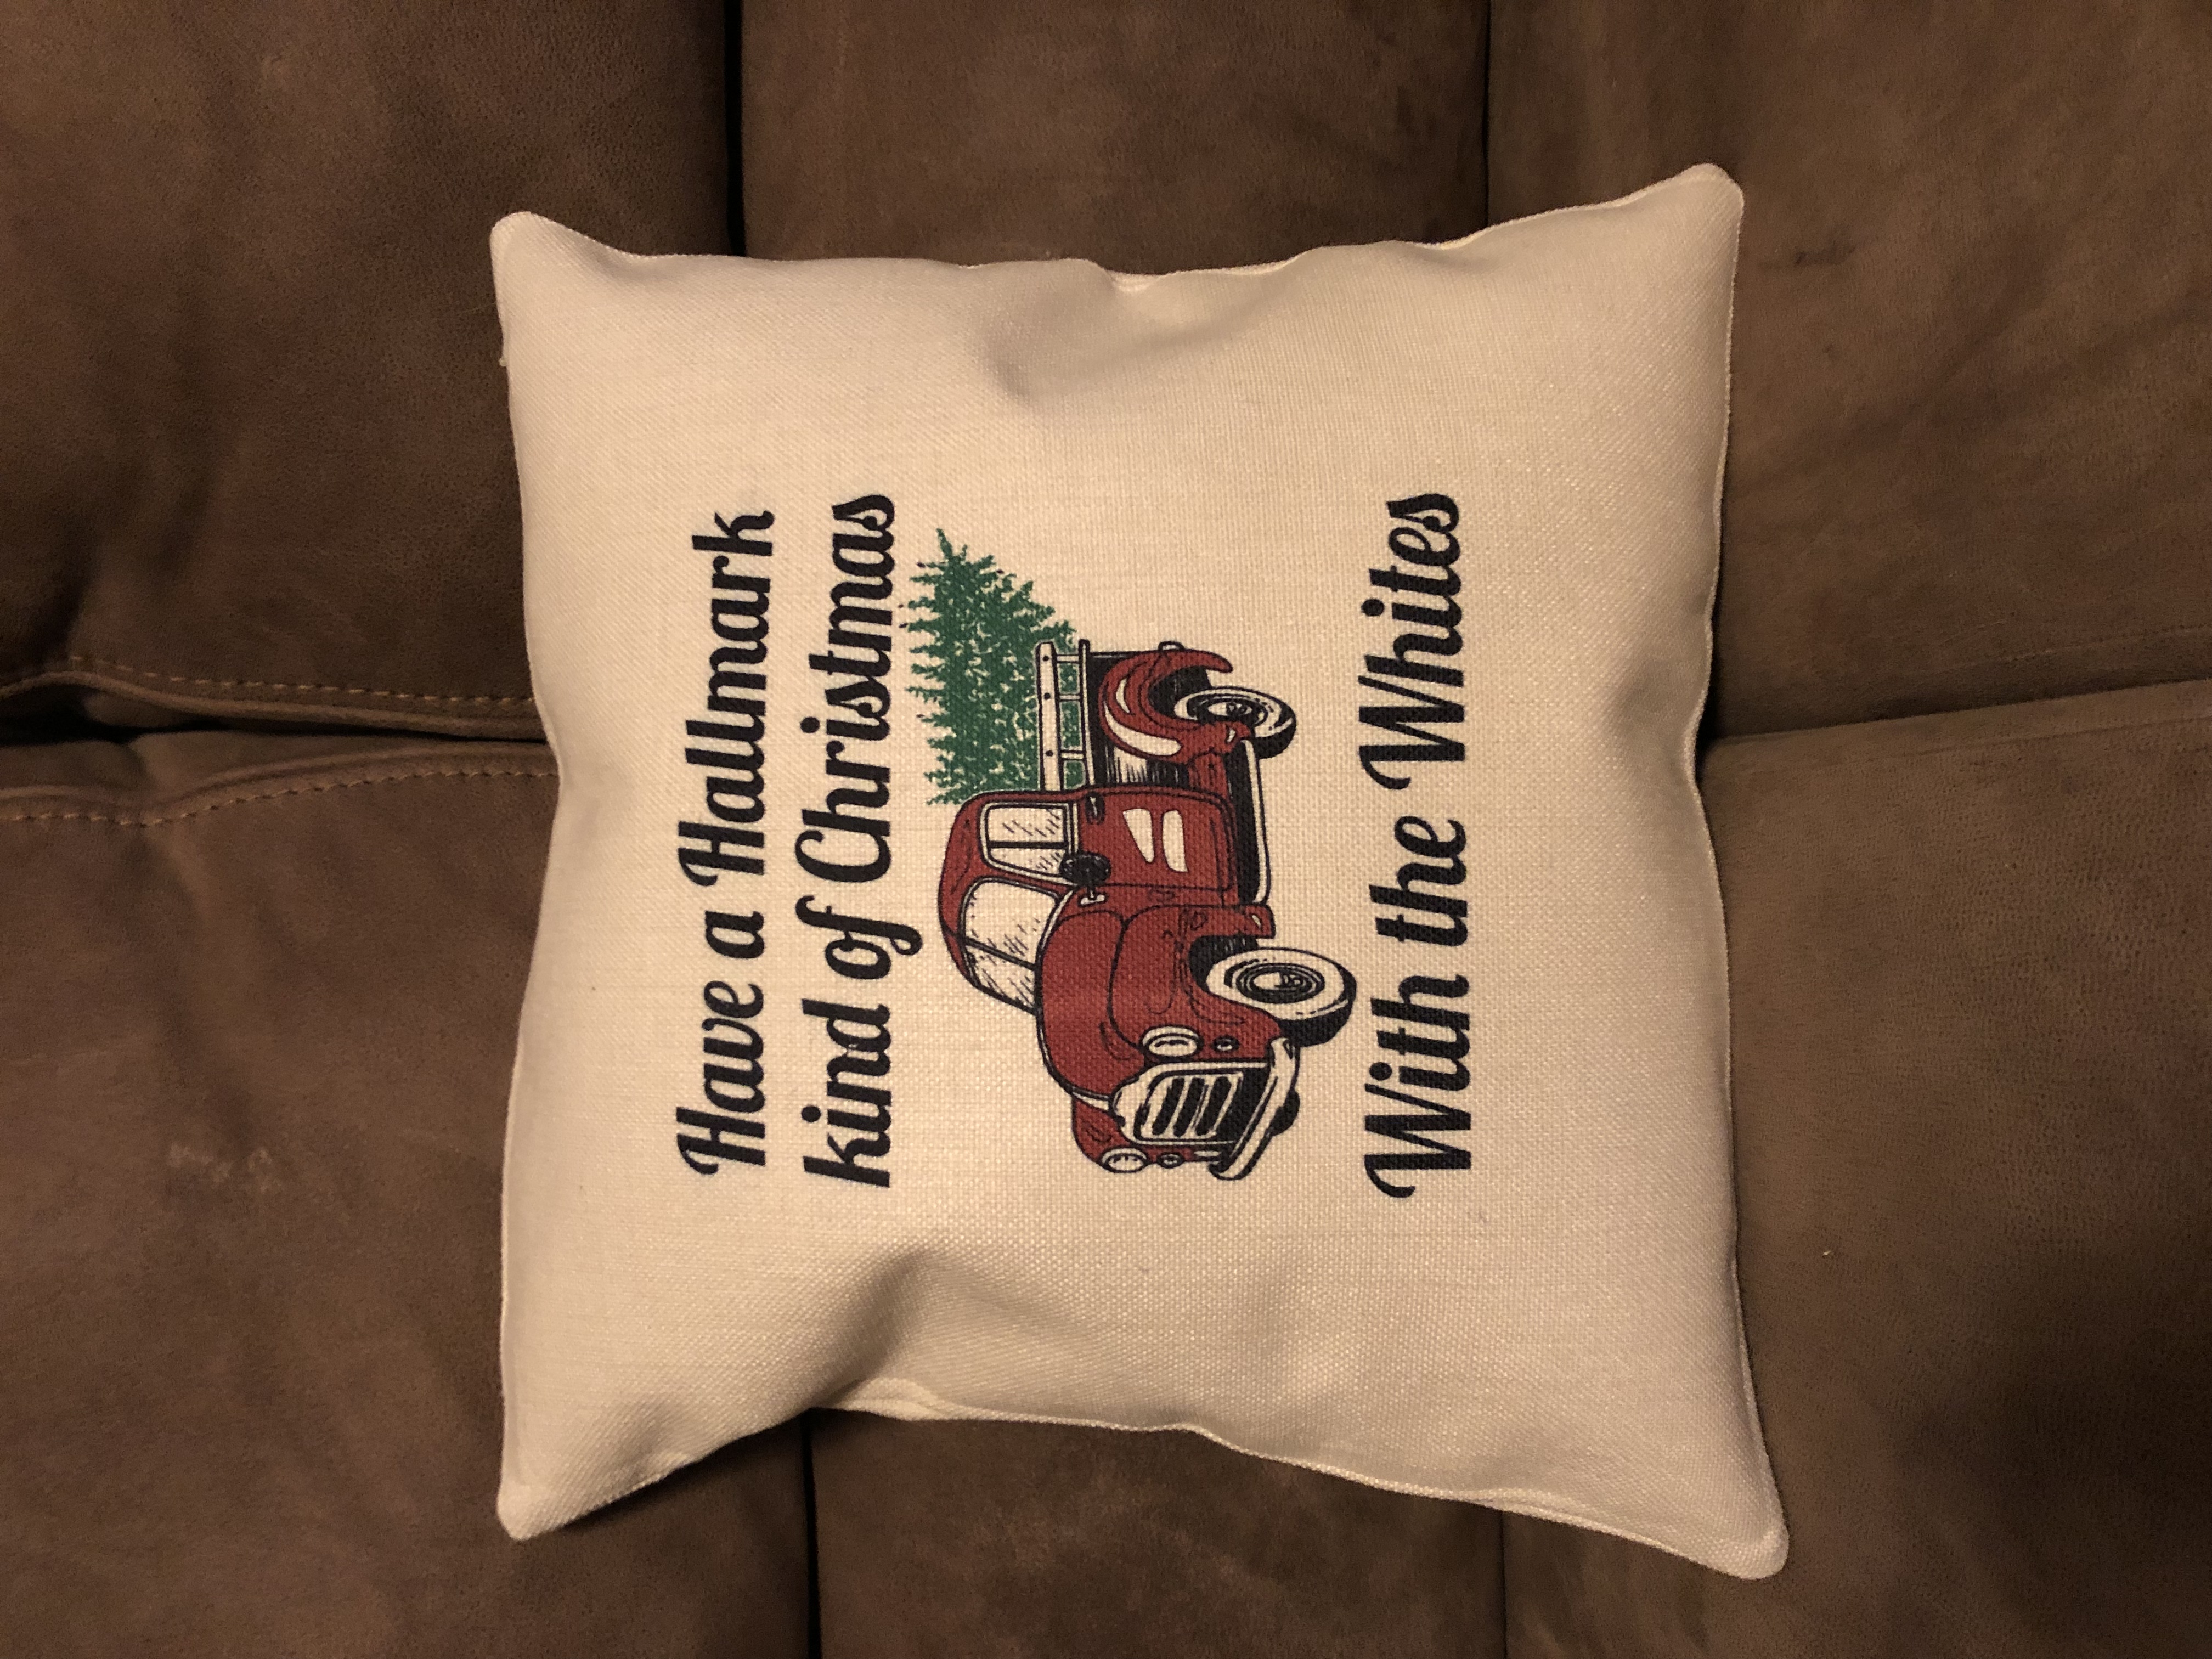 Throw pillow made with sublimation printing